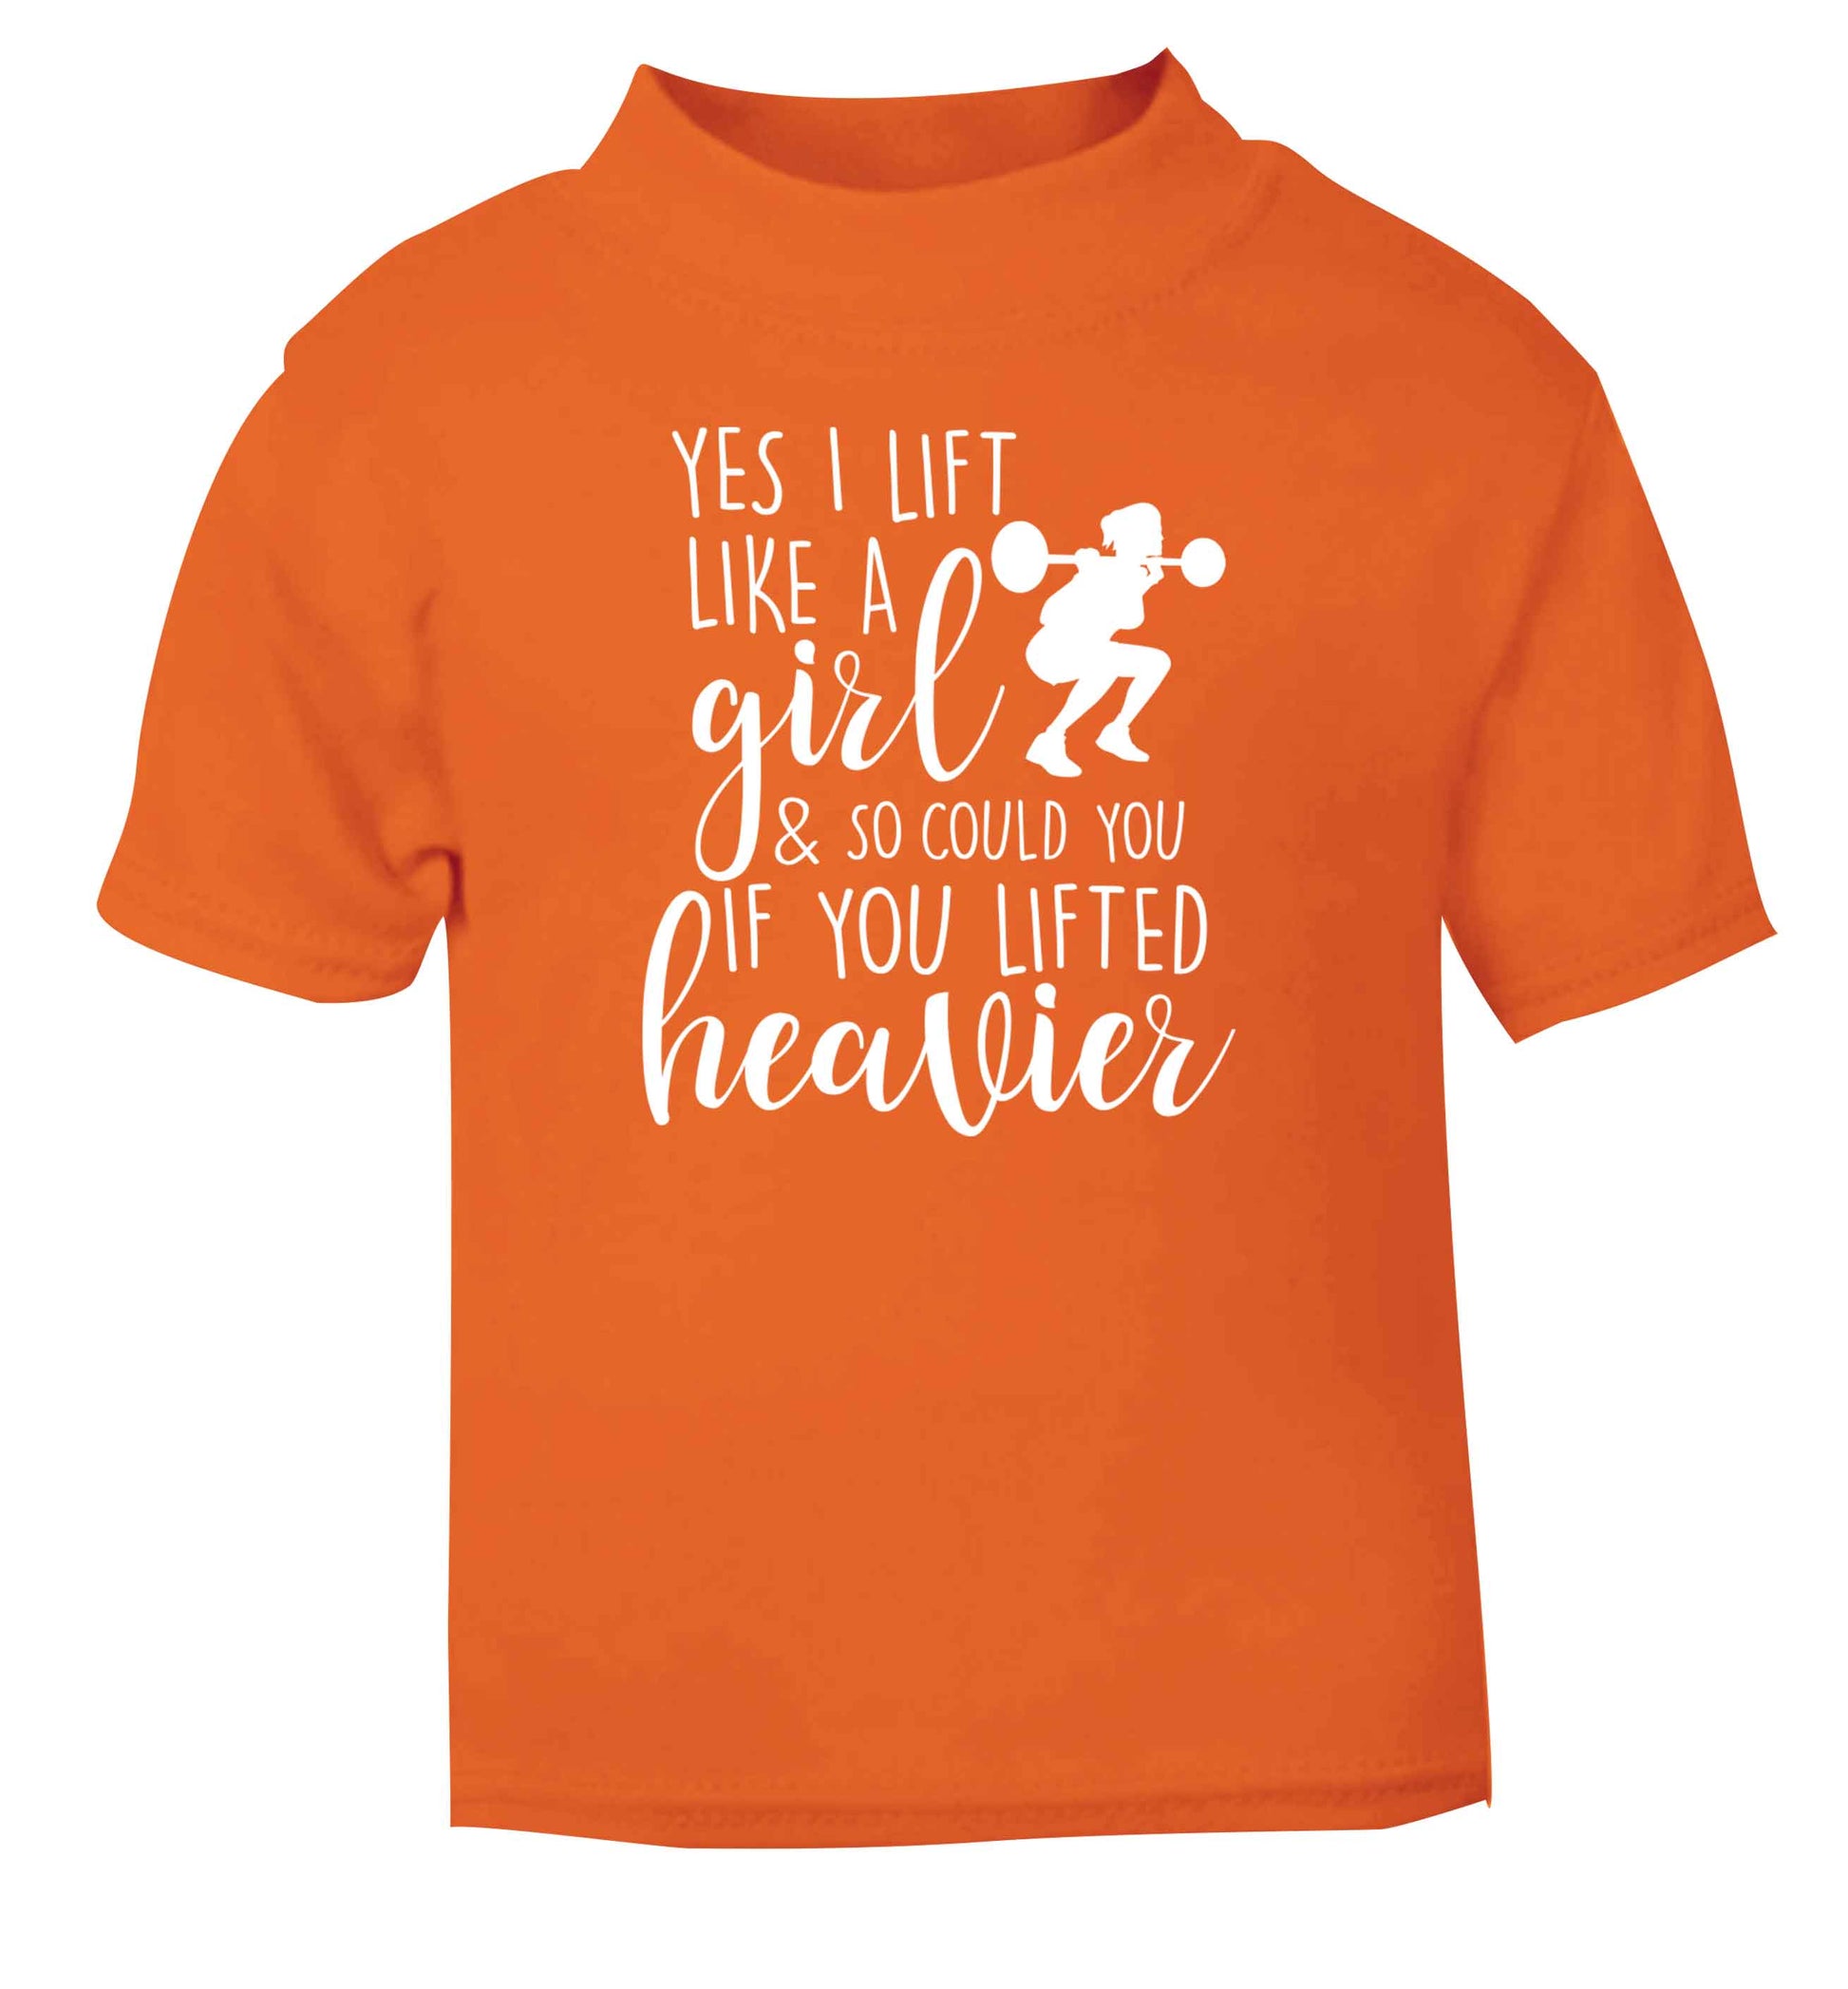 Yes I lift like a girl and so could you if you lifted heavier orange Baby Toddler Tshirt 2 Years